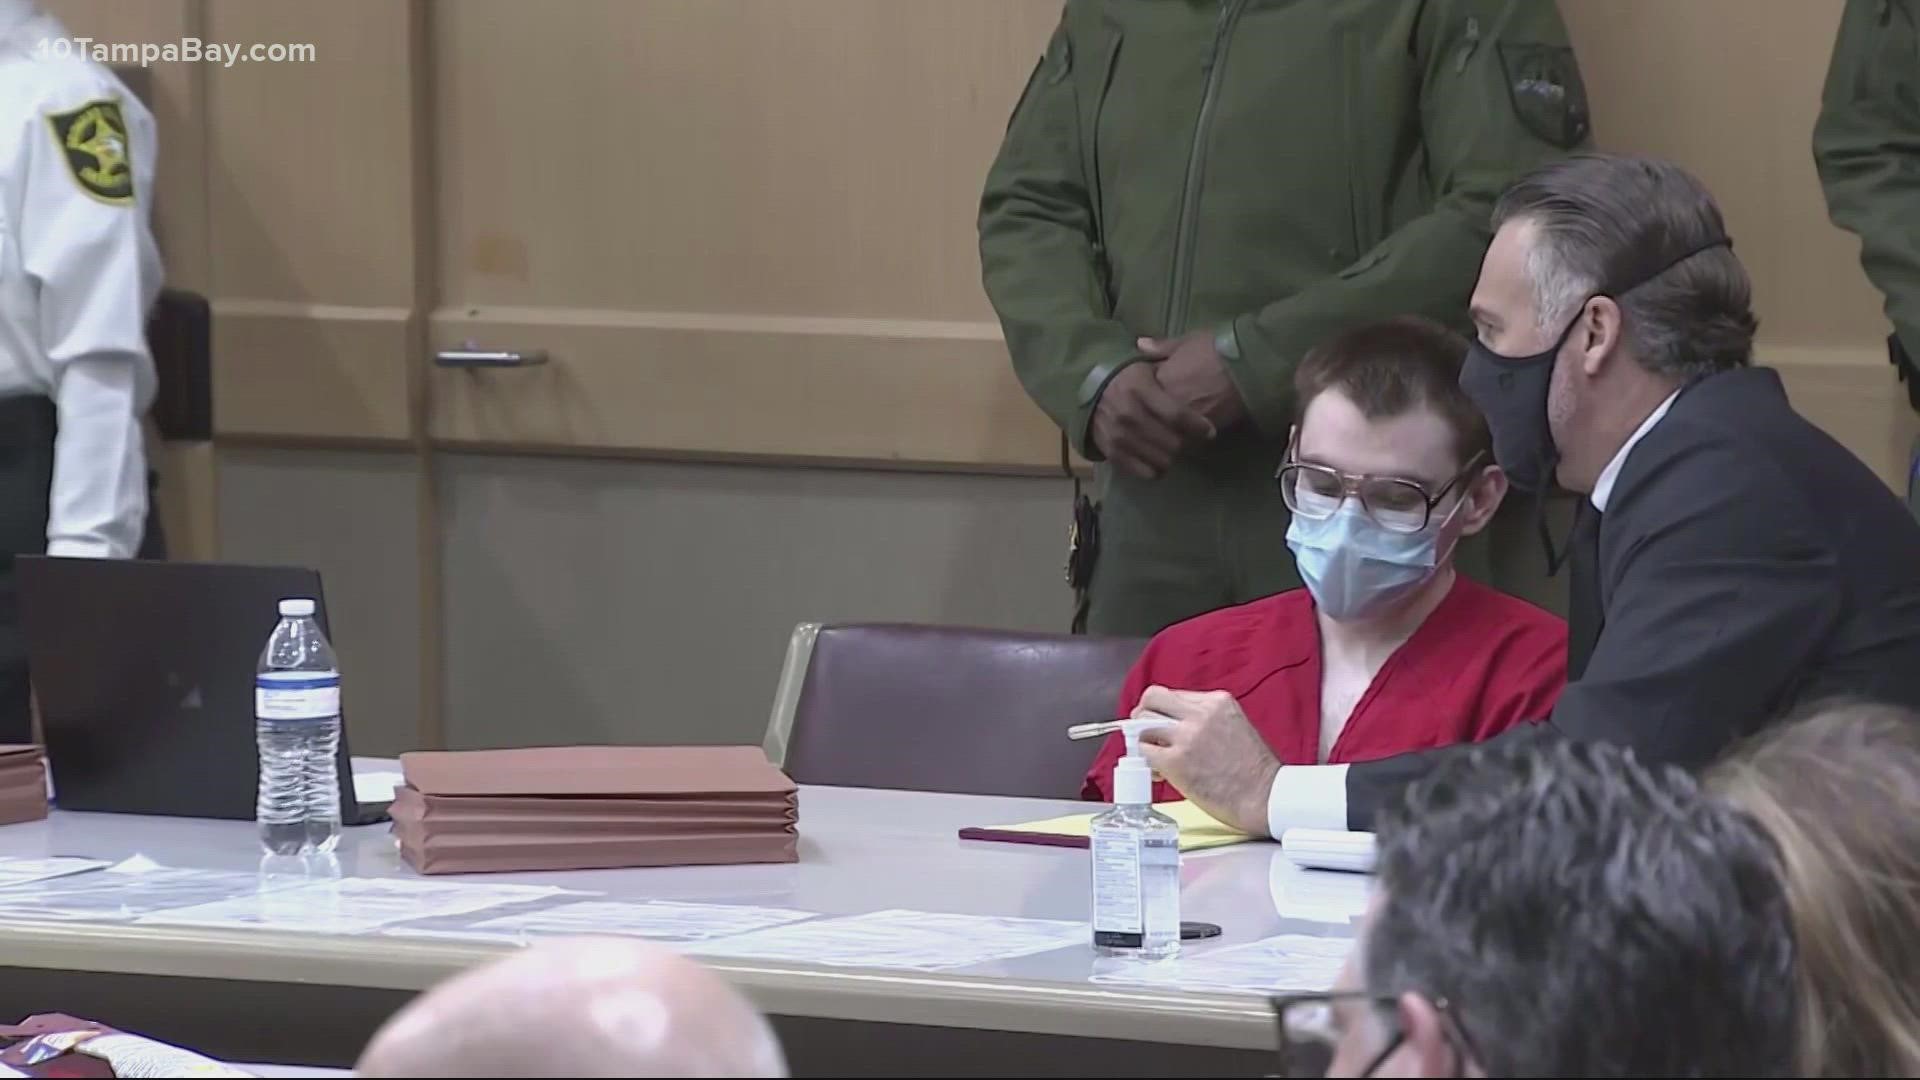 Nikolas Cruz pleaded guilty in October to 17 counts of first-degree murder and 17 counts of attempted murder. Now he will go to trial.